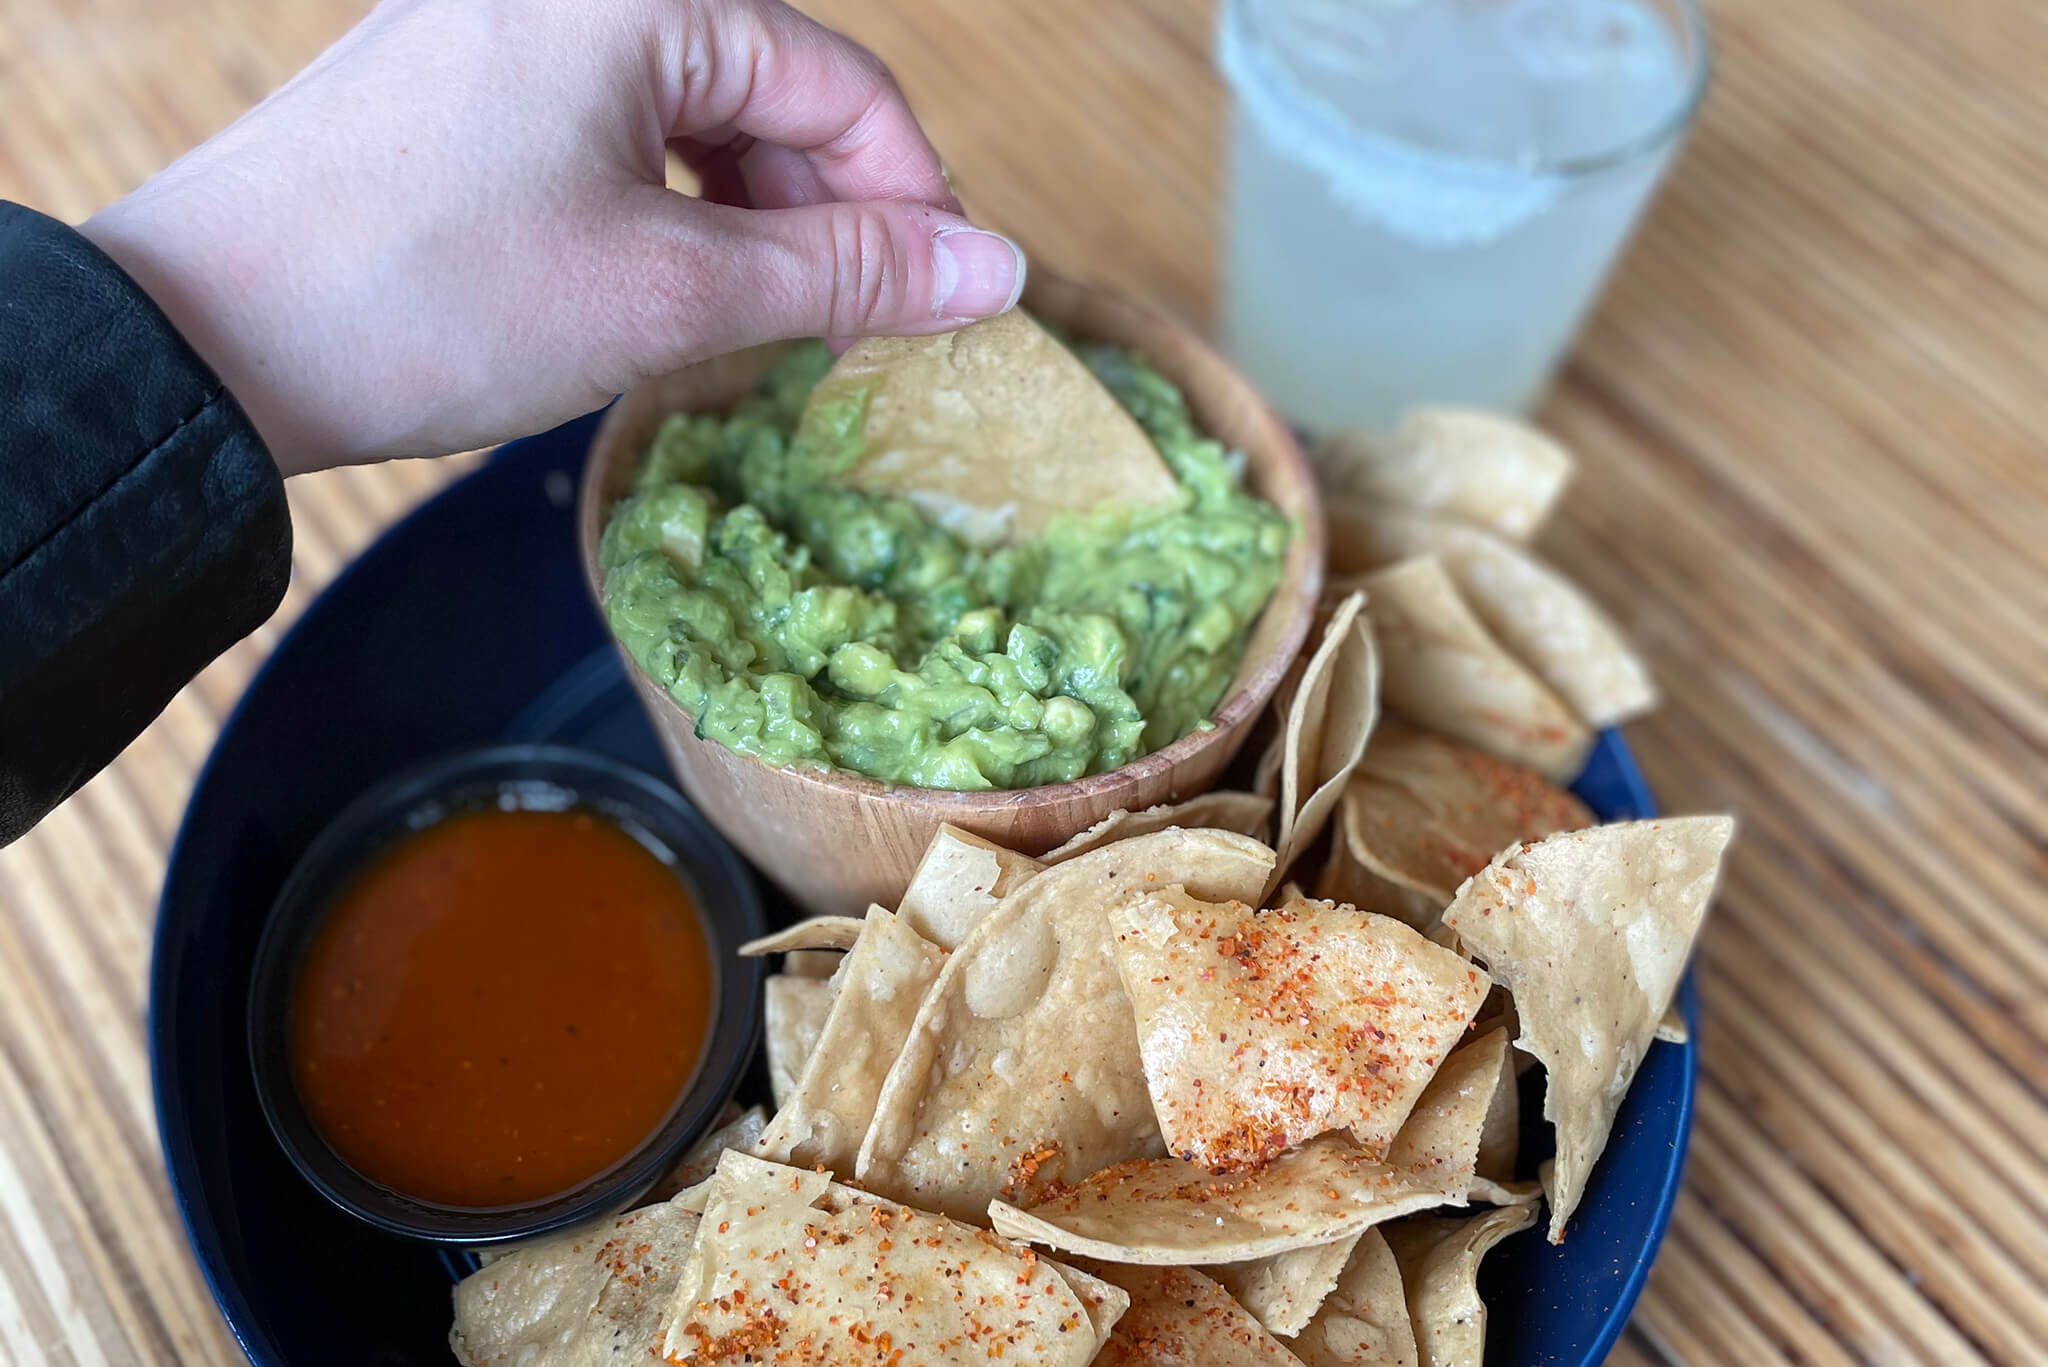 Photo of a hand dipping chips into guacamole